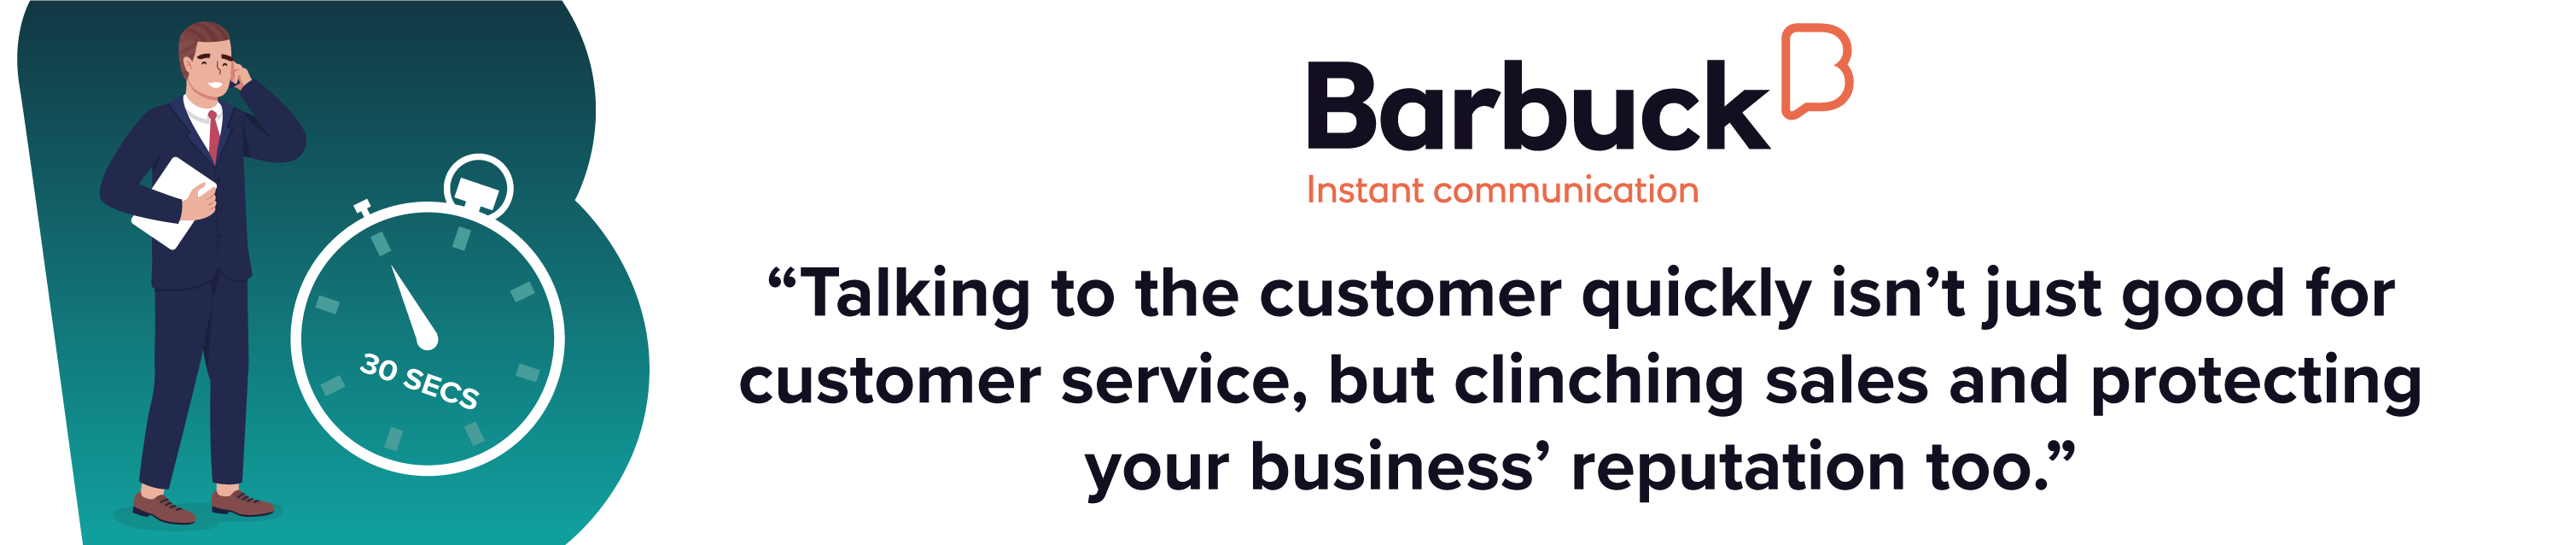 Service that will get your customers talking